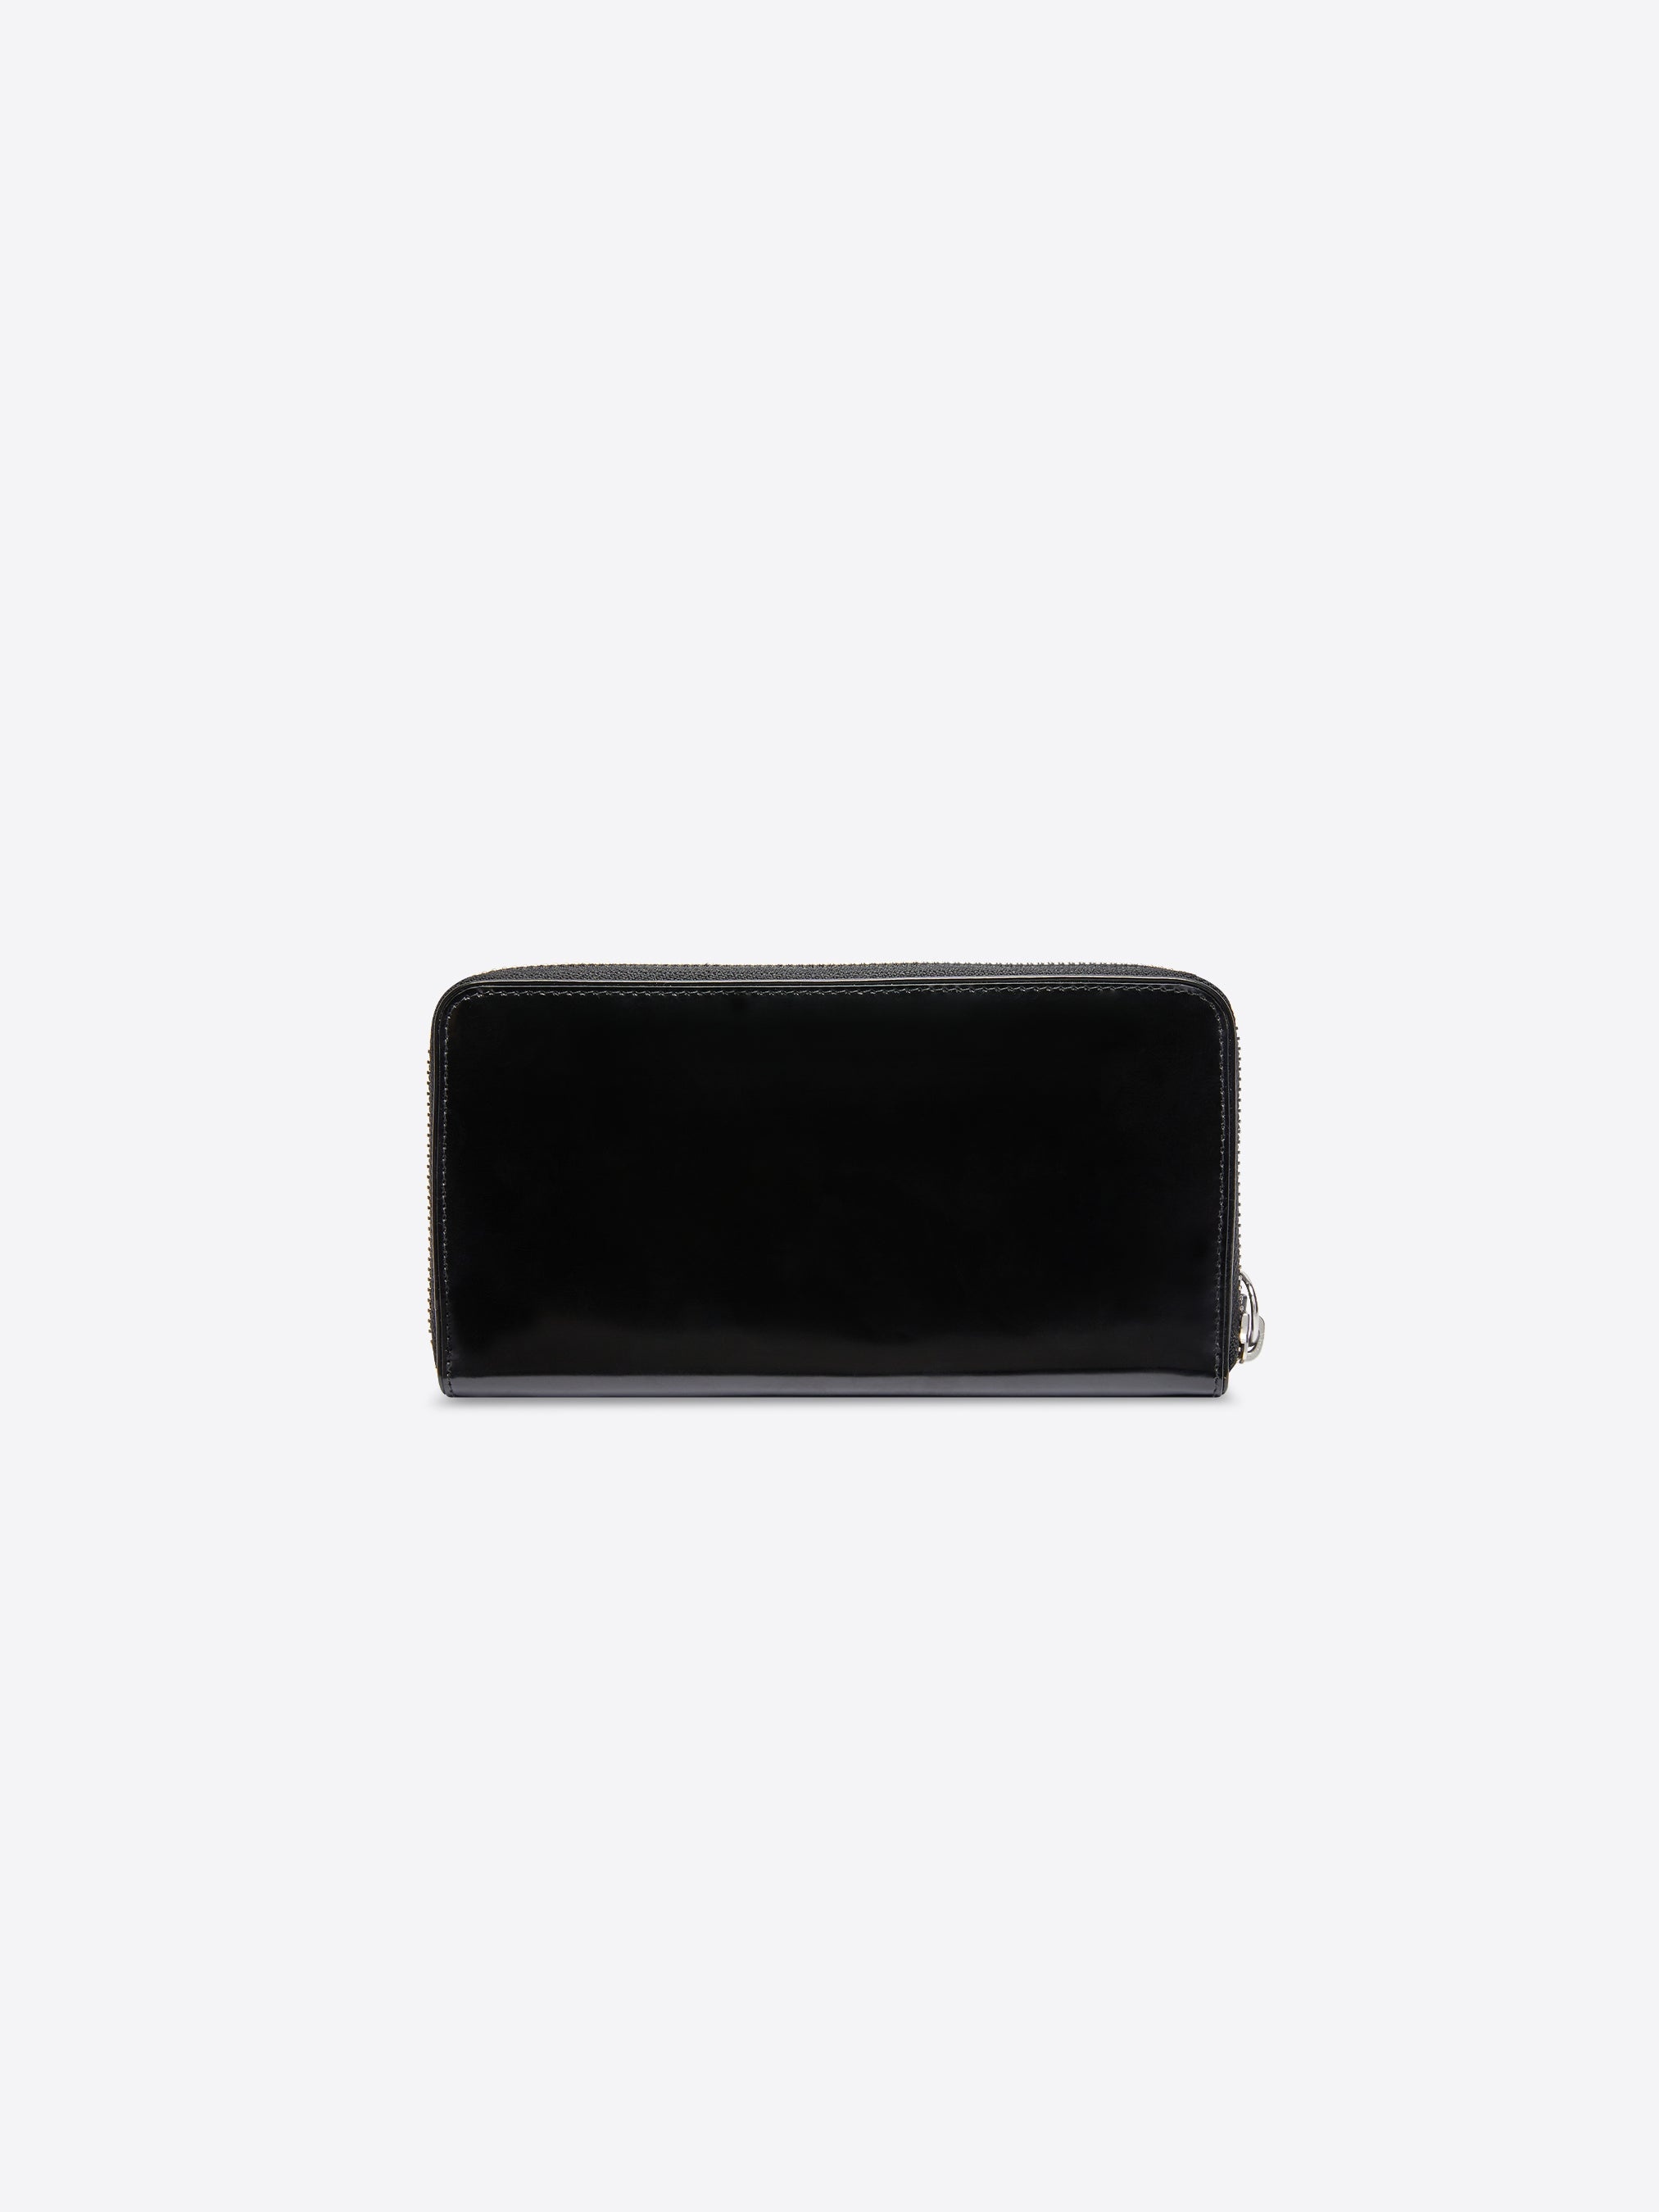 LARGE LEATHER WALLET - 2